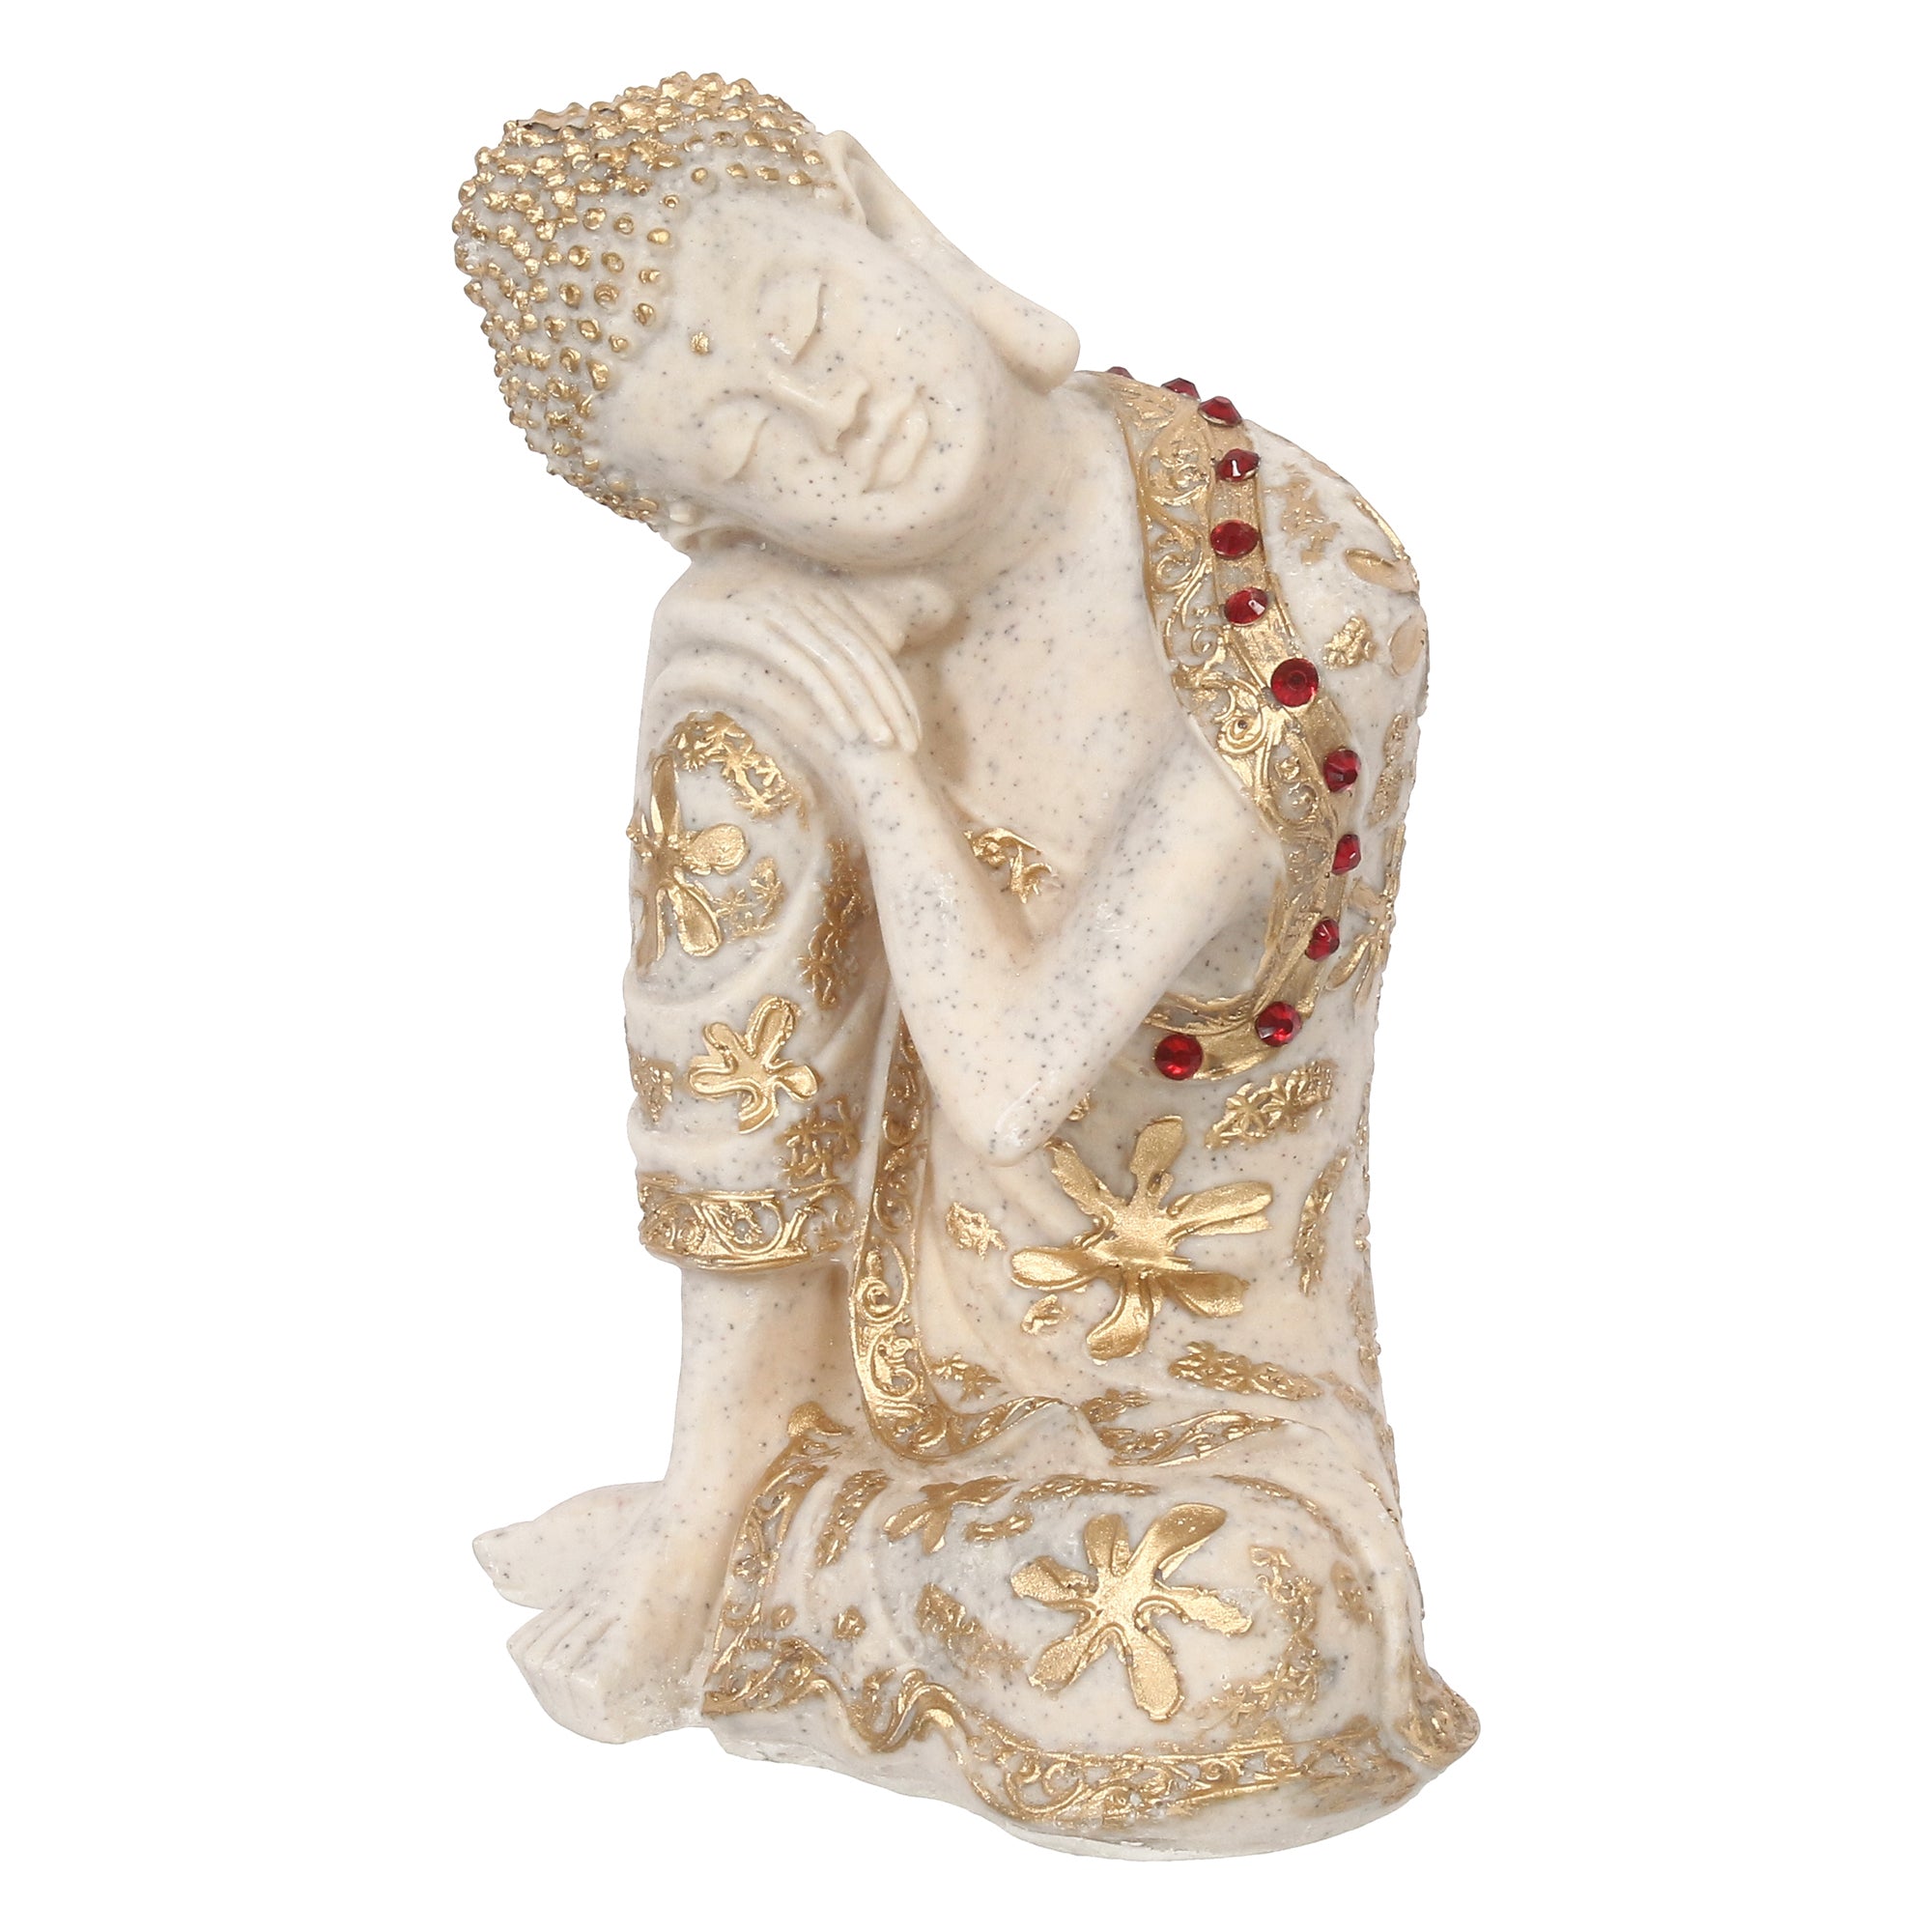 Polyresin White and Golden Resting Buddha on Knee Statue 1